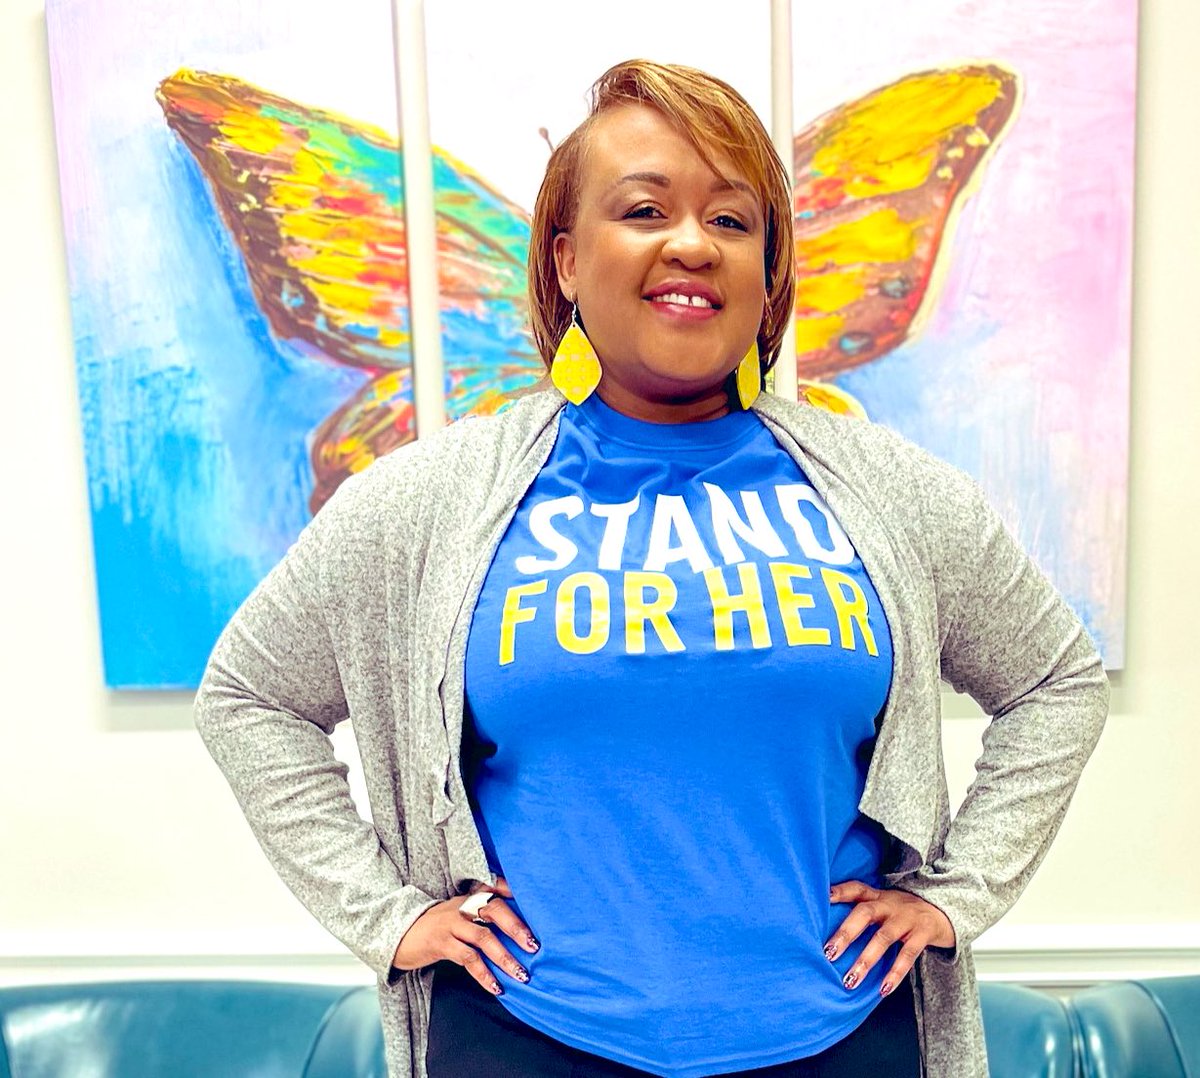 Today is #NationalHumanTraffickingAwarenessDay! Show your support for survivors by wearing blue. 💙 @DHSBlueCampaign @DHSgov @nfnlnews #WearBlueDay #standforher 🦋